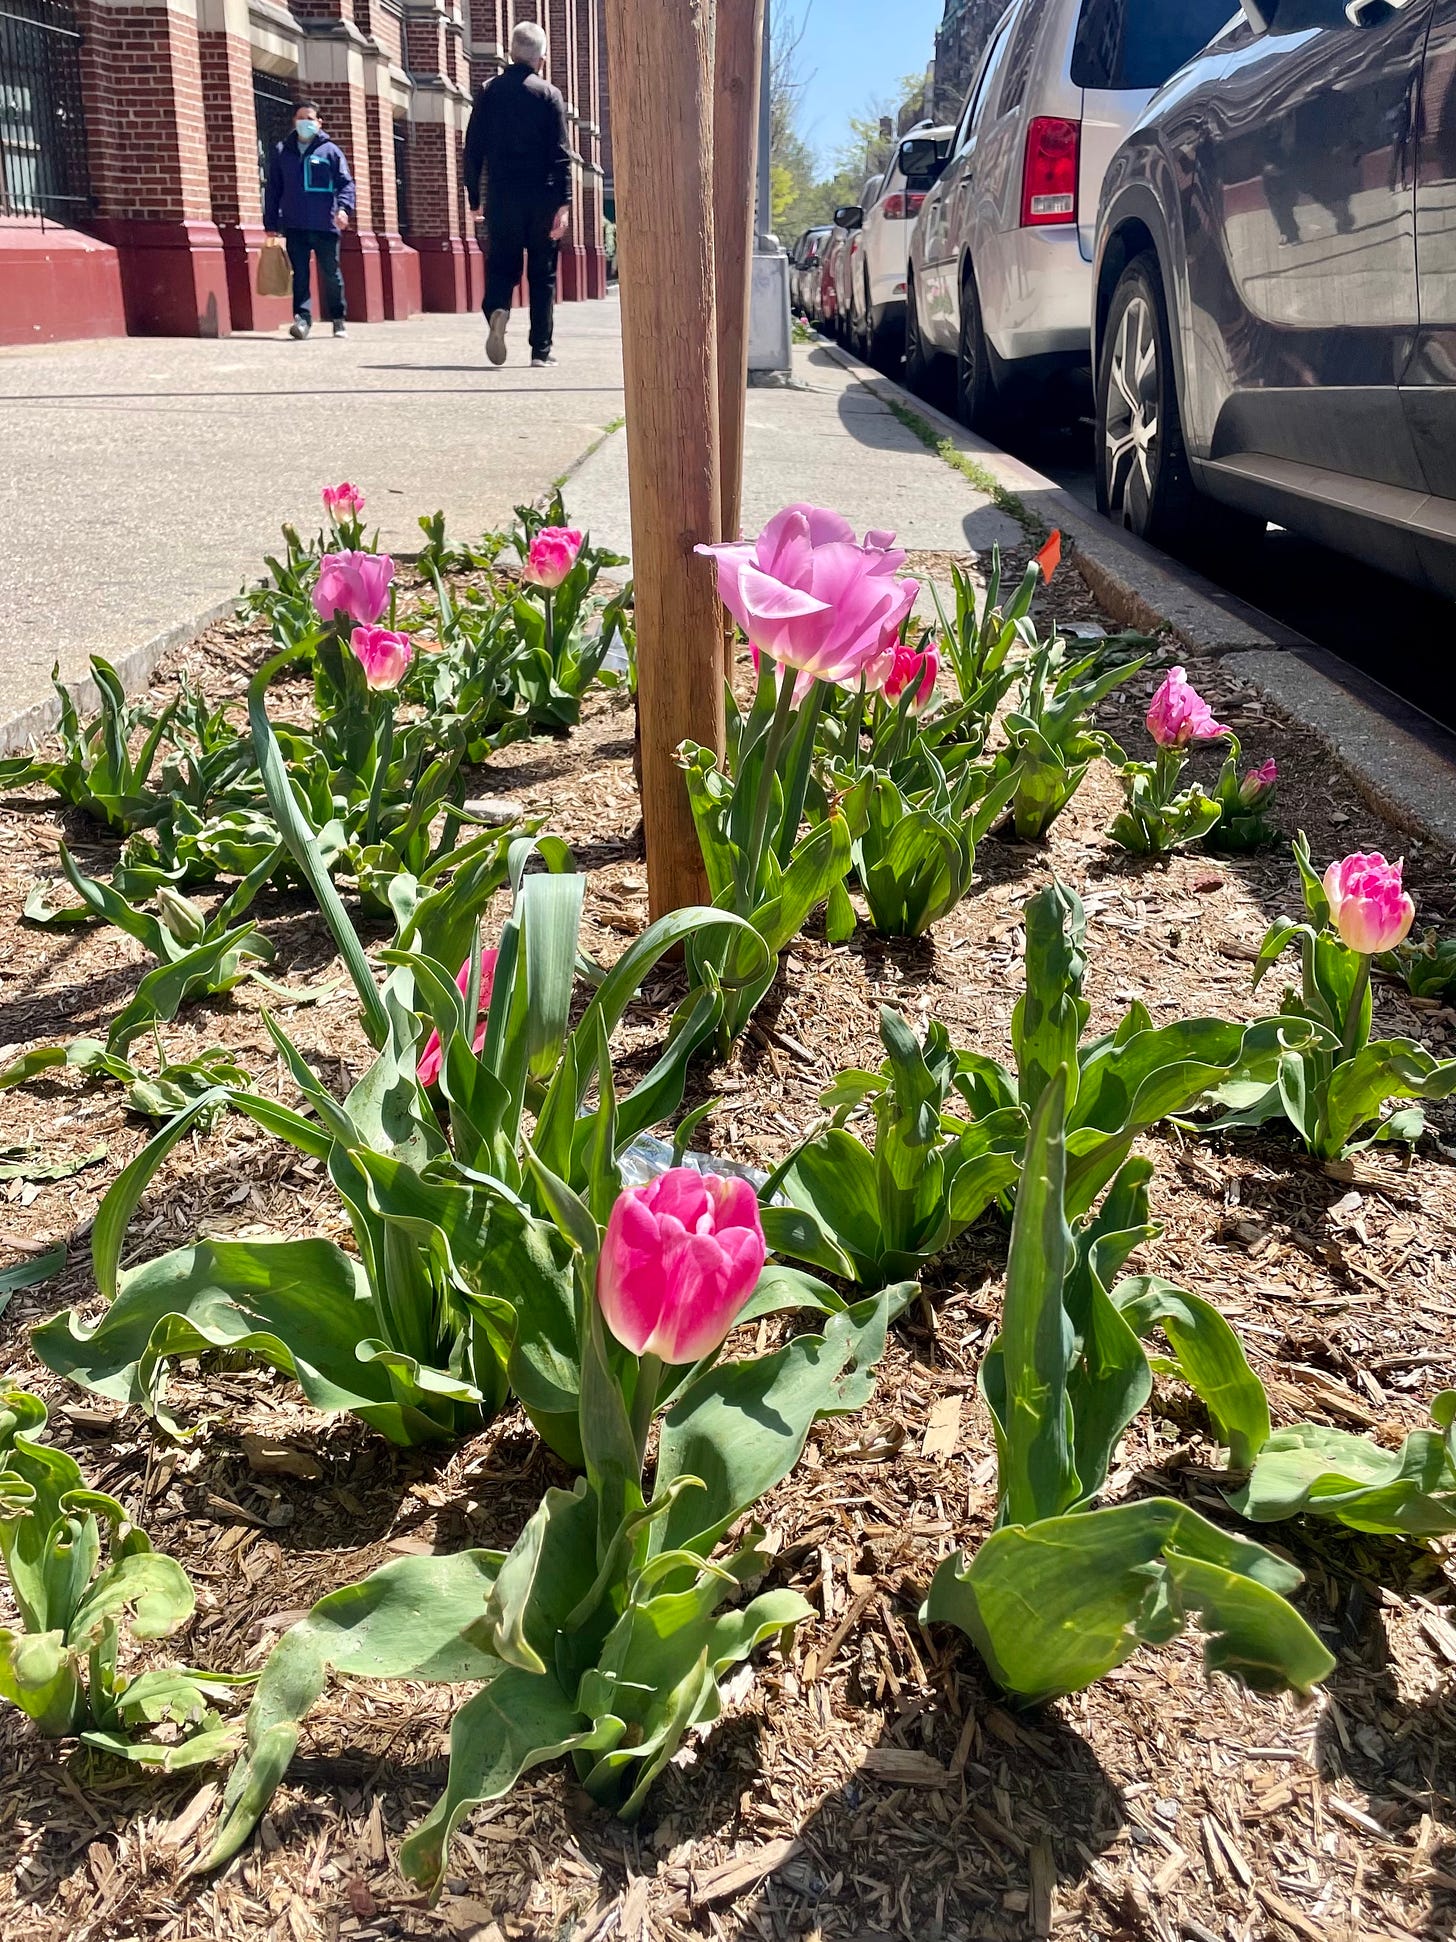 ID: Photo of a street tree bed with pink flowering bulbs popping out of the mulch.